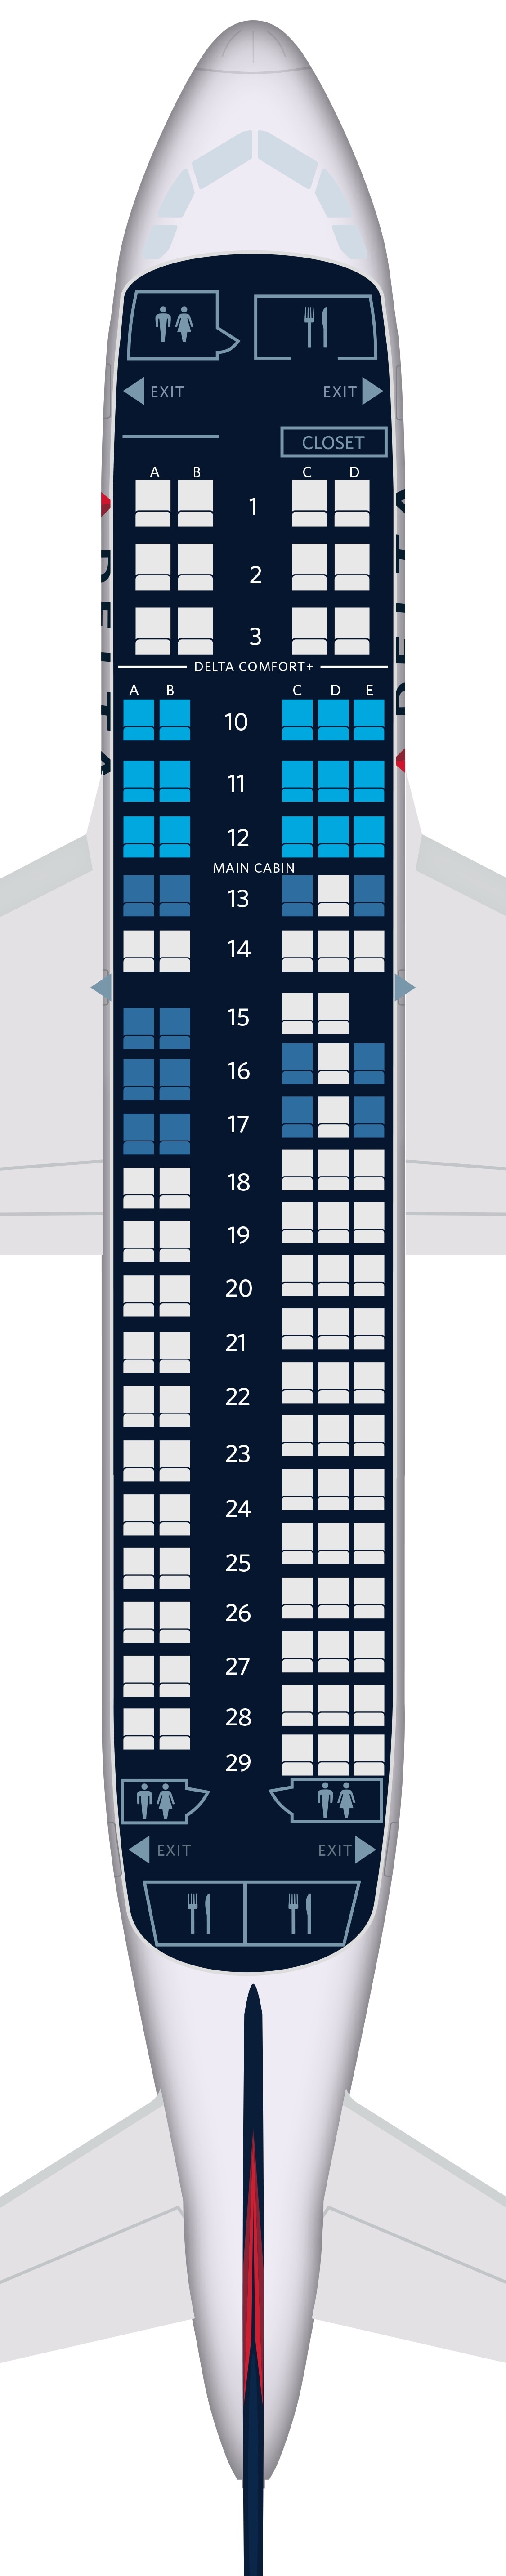 Airbus A220 Seating Configuration